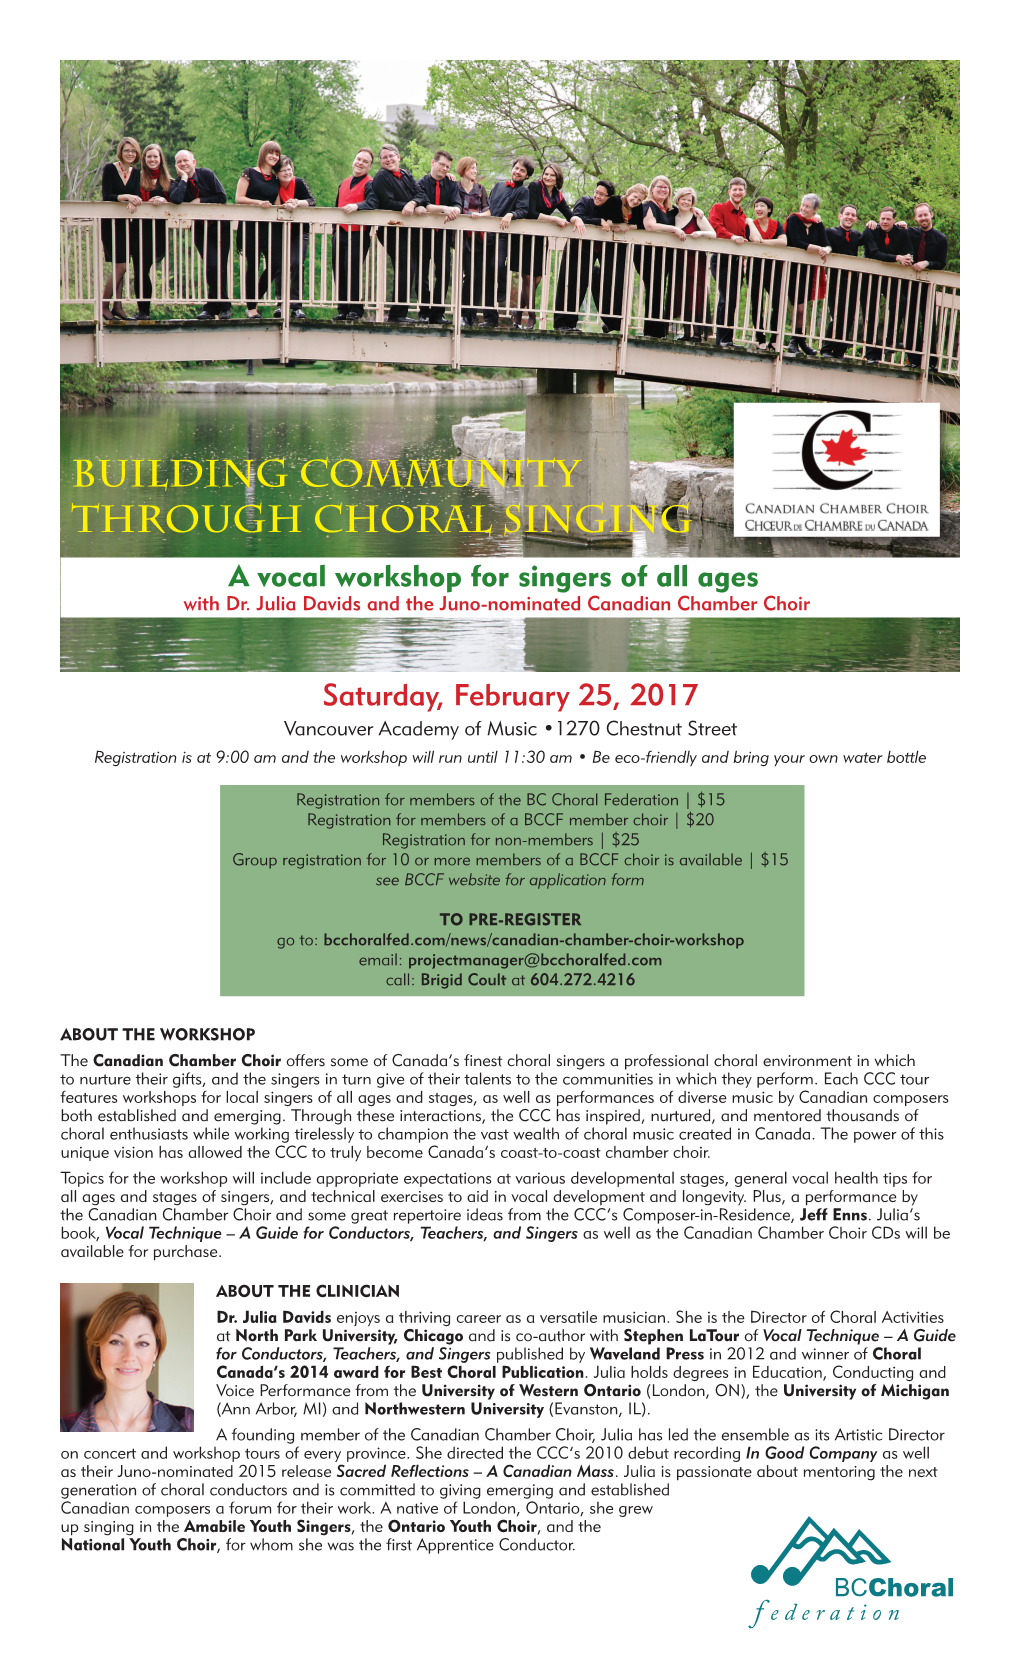 Saturday, February 25, 2017 a Vocal Workshop for Singers of All Ages